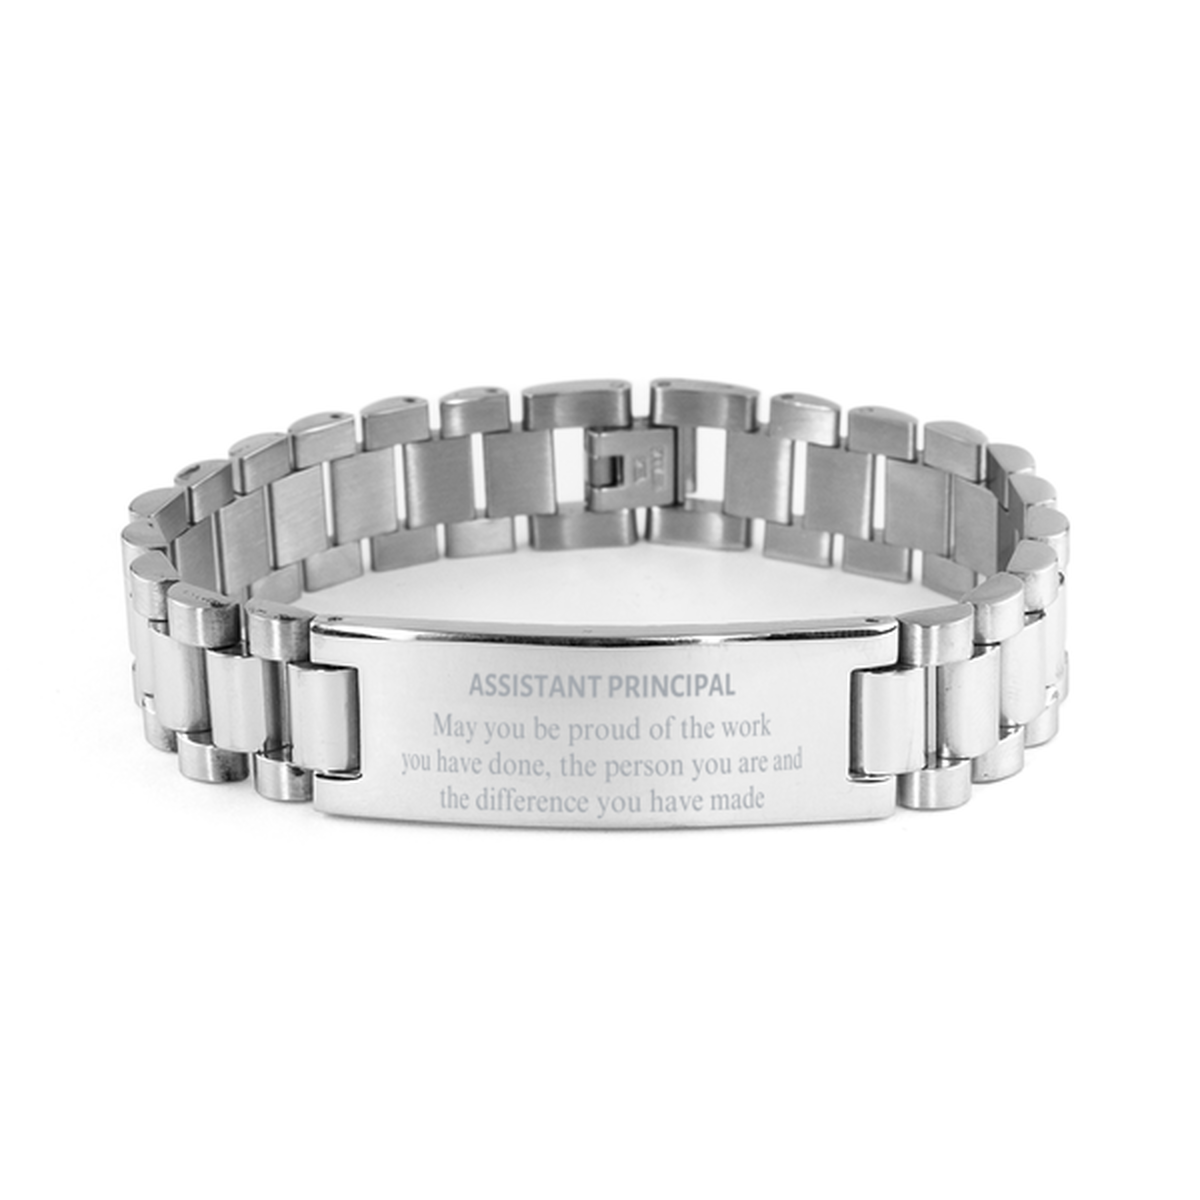 Assistant Principal May you be proud of the work you have done, Retirement Assistant Principal Ladder Stainless Steel Bracelet for Colleague Appreciation Gifts Amazing for Assistant Principal